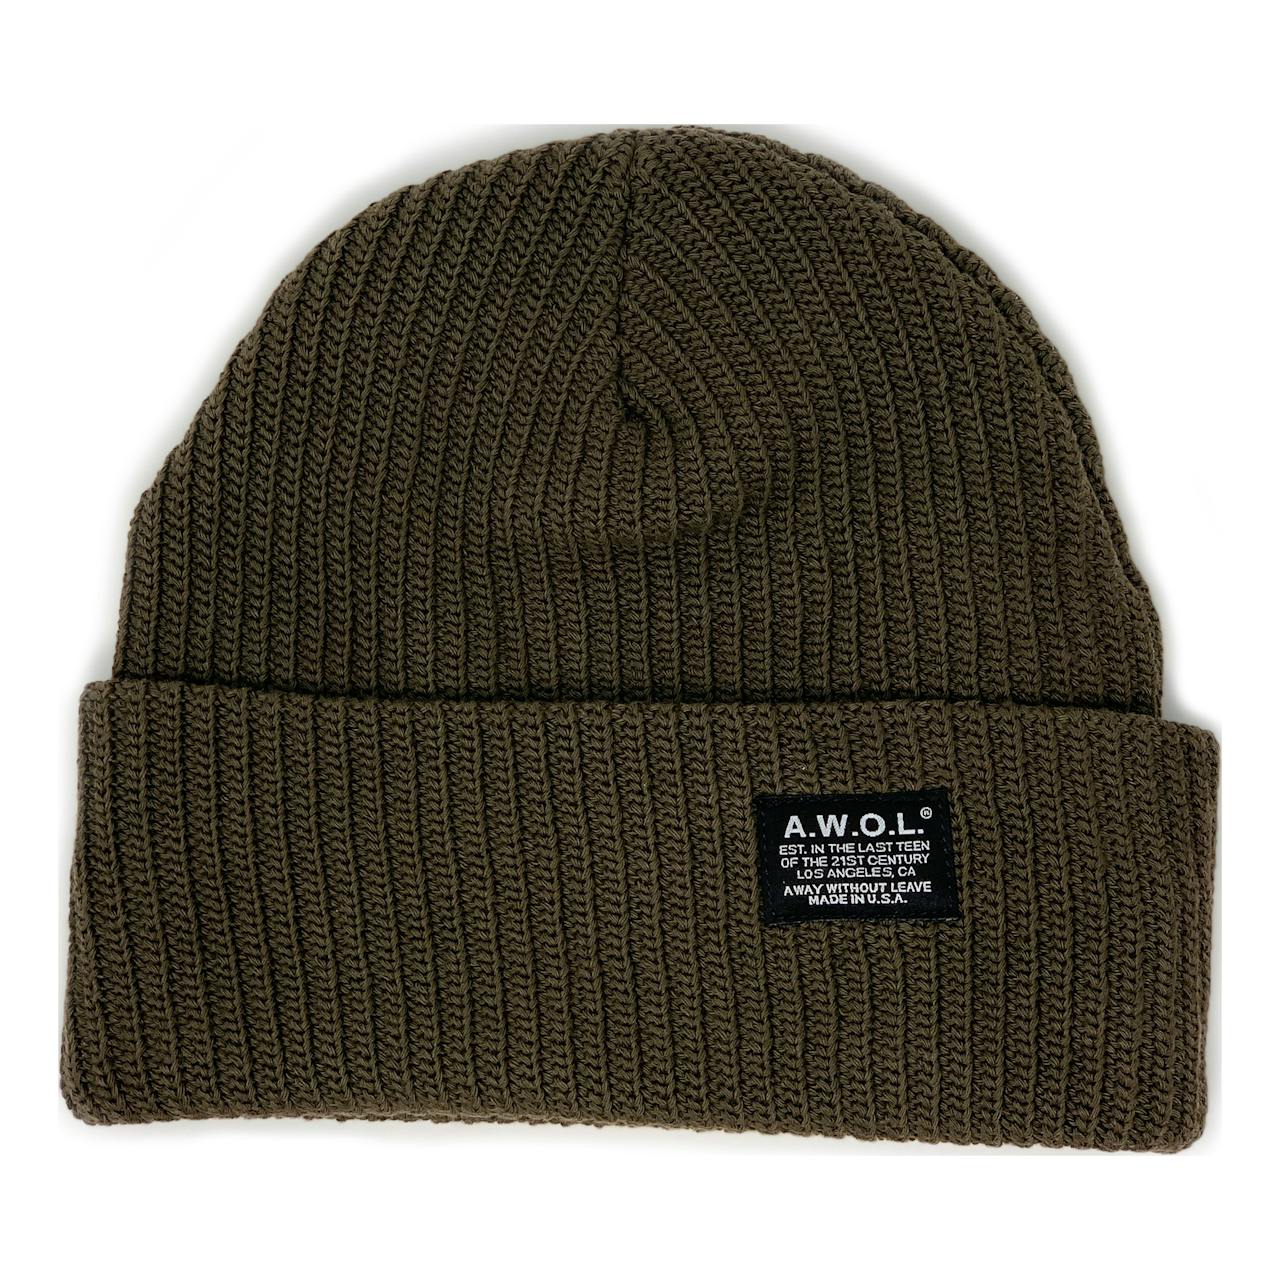 Away Without Leave Fisherman Beanie